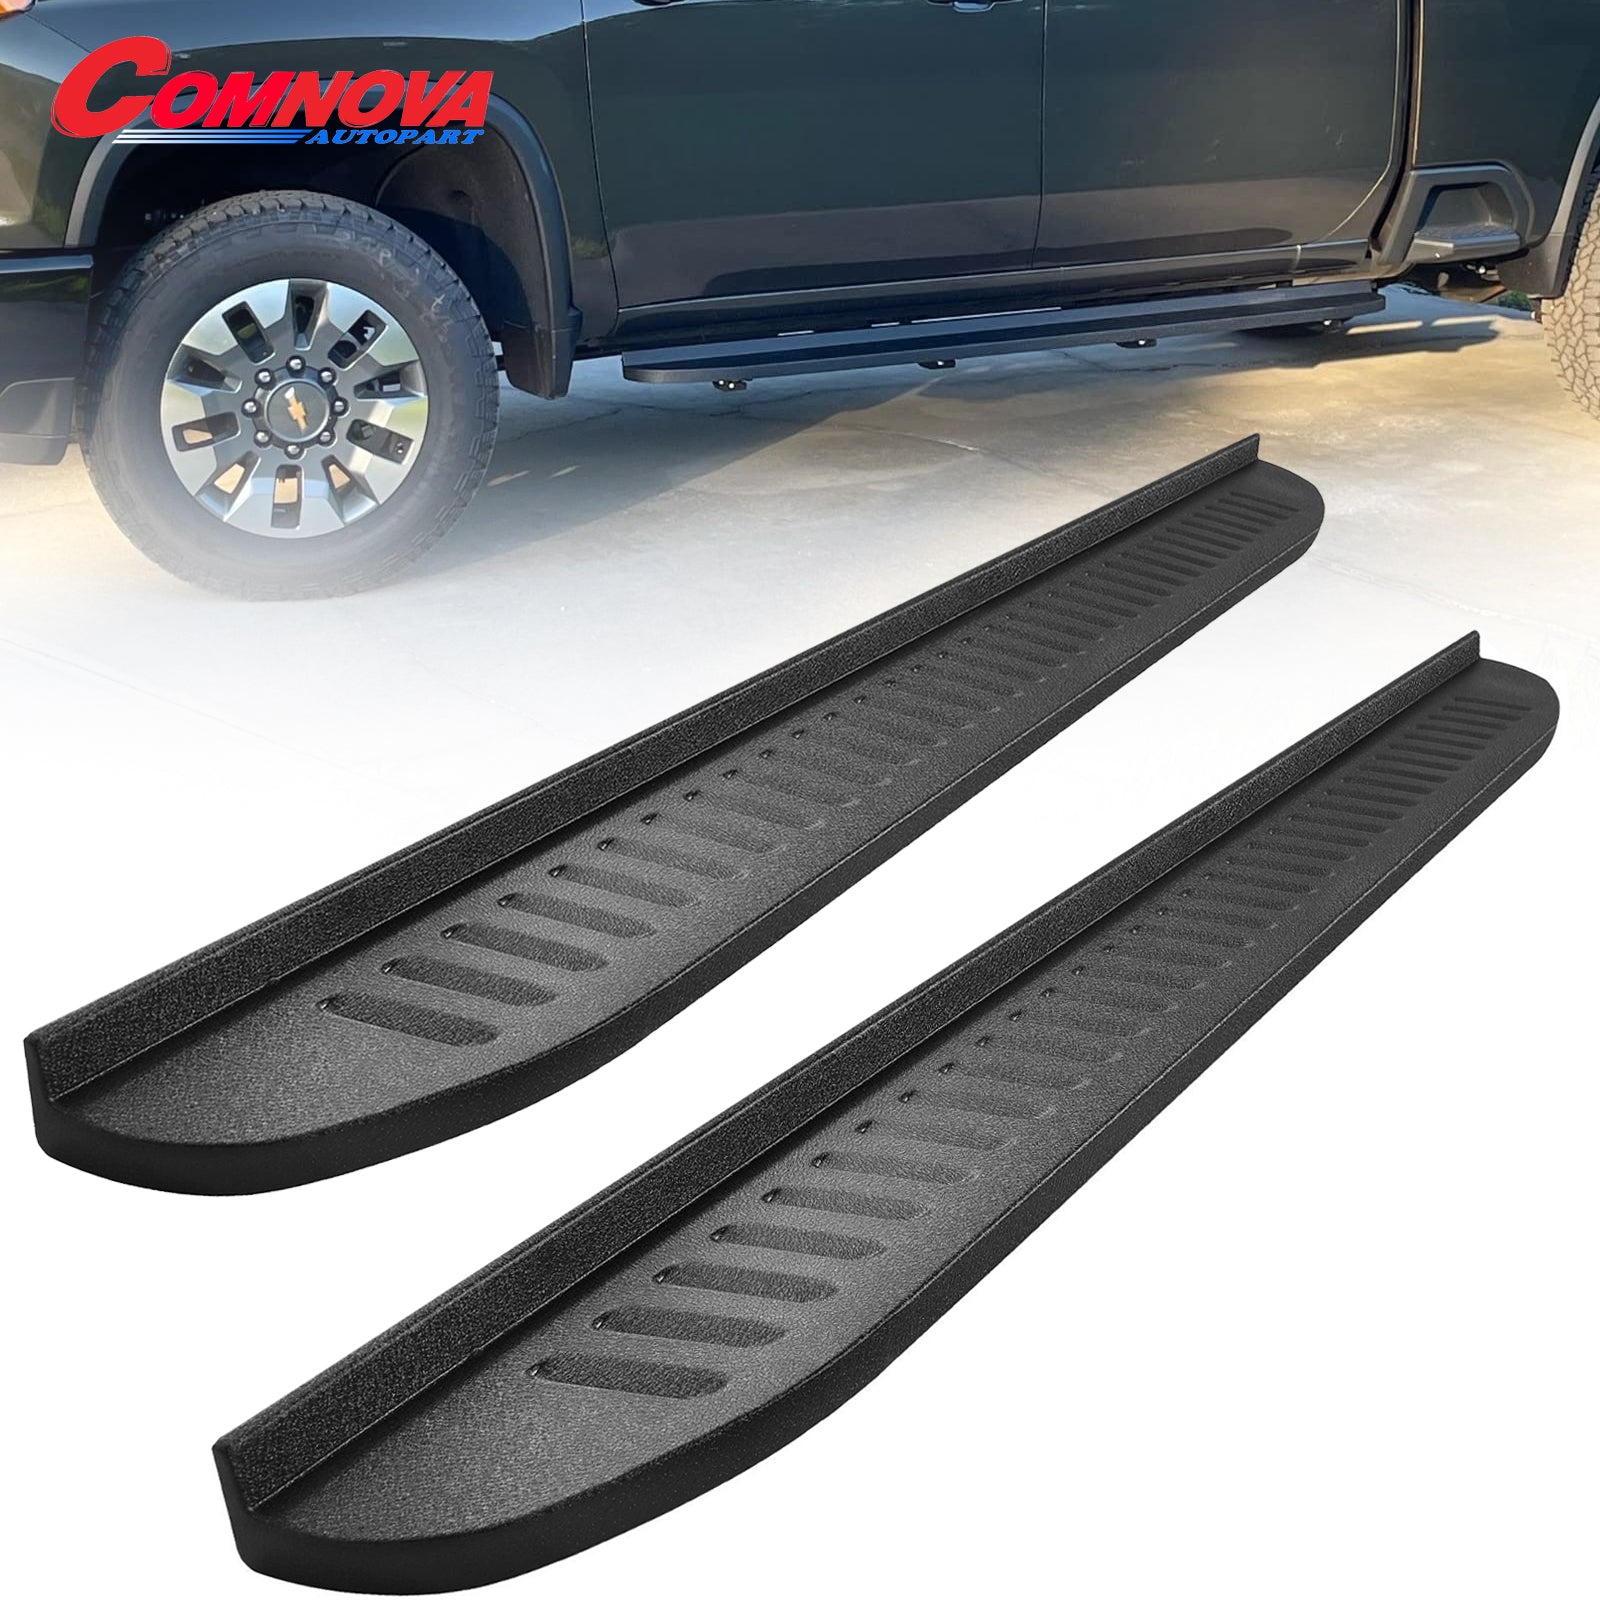 Running Boards Compatible with 2009-2018 Dodge Ram 1500 & 2010-2024 Ram 2500 3500 & 2019-2023 Dodge Ram 1500 Classic Crew Cab, Side Steps D7 Style. - COMNOVA AUTOPART